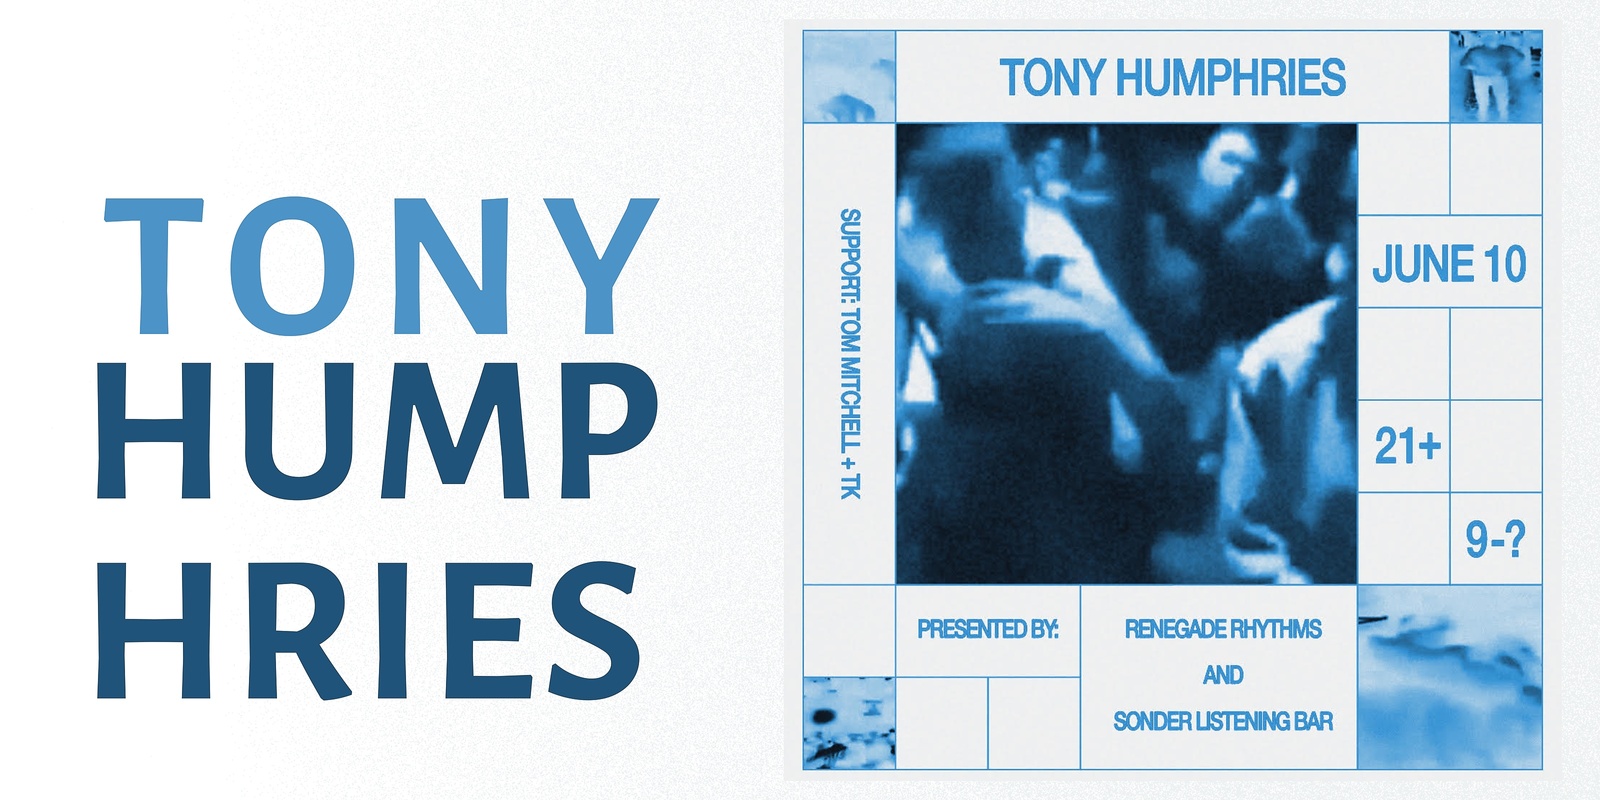 Banner image for TONY HUMPHRIES (New Jersey)               The Sonder Bar & Renegade Rhythms present:       an intimate evening with THE King of House